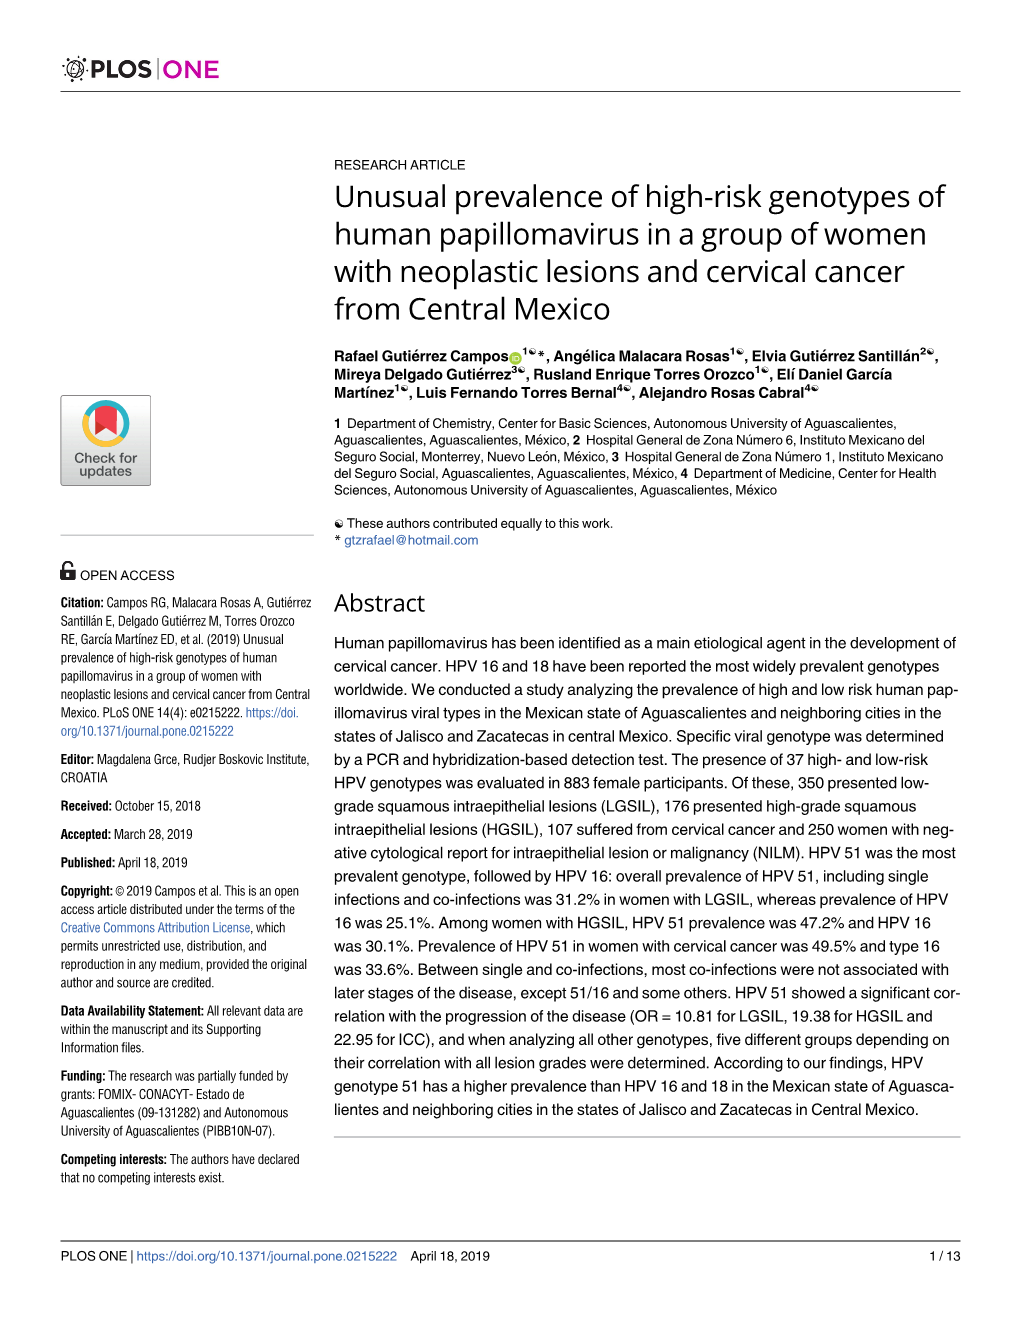 Unusual Prevalence of High-Risk Genotypes of Human Papillomavirus in a Group of Women with Neoplastic Lesions and Cervical Cancer from Central Mexico